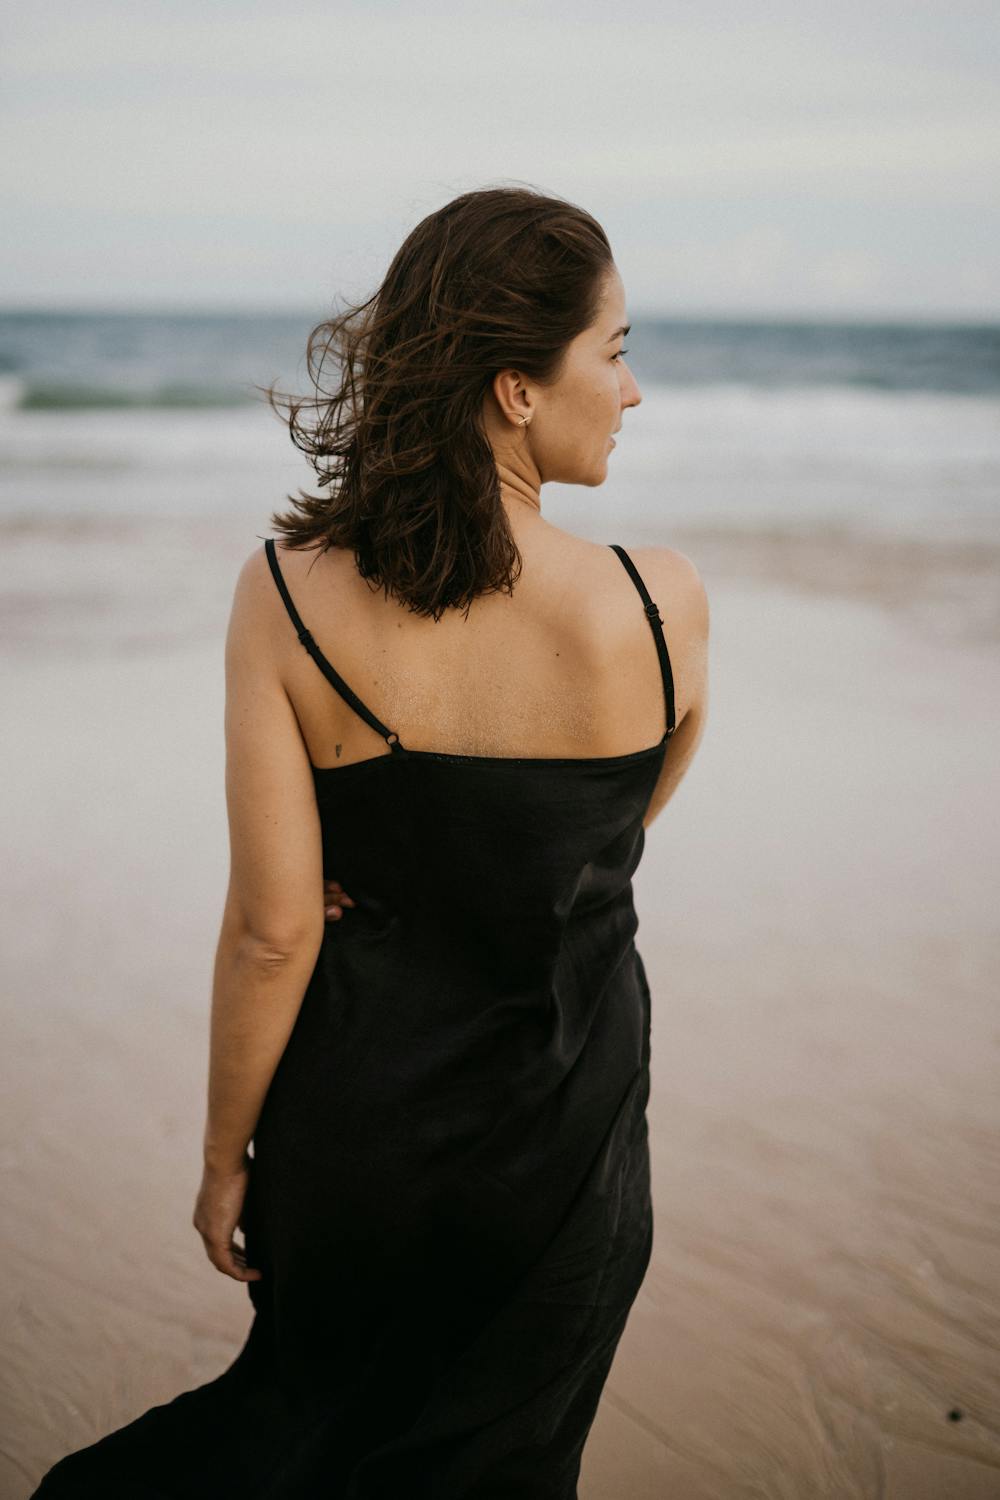 Back View of a Woman in a Black Dress Walking on the Beach · Free Stock ...